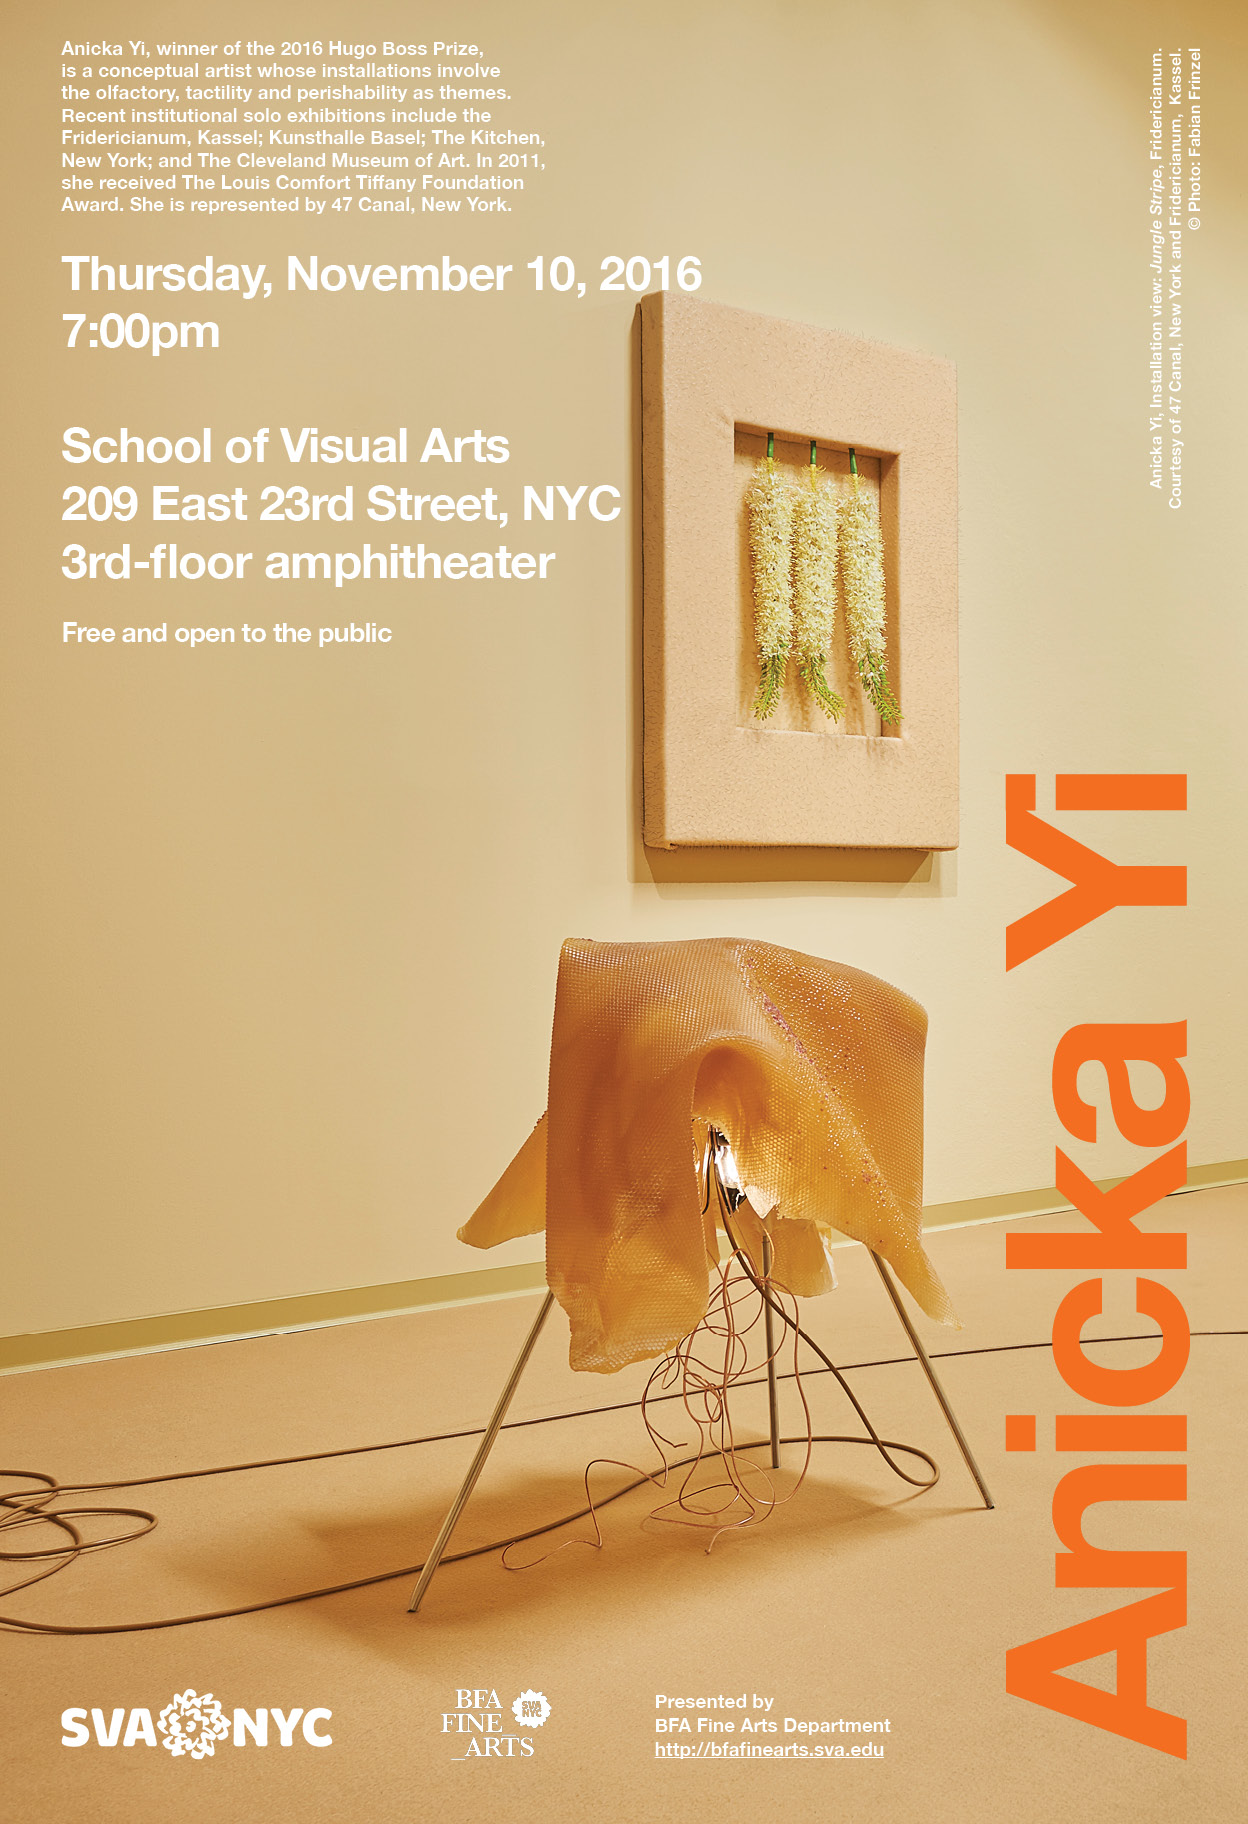 Poster image for visiting artist, Anicka Yi at the School of Visual Arts on 23rd street.